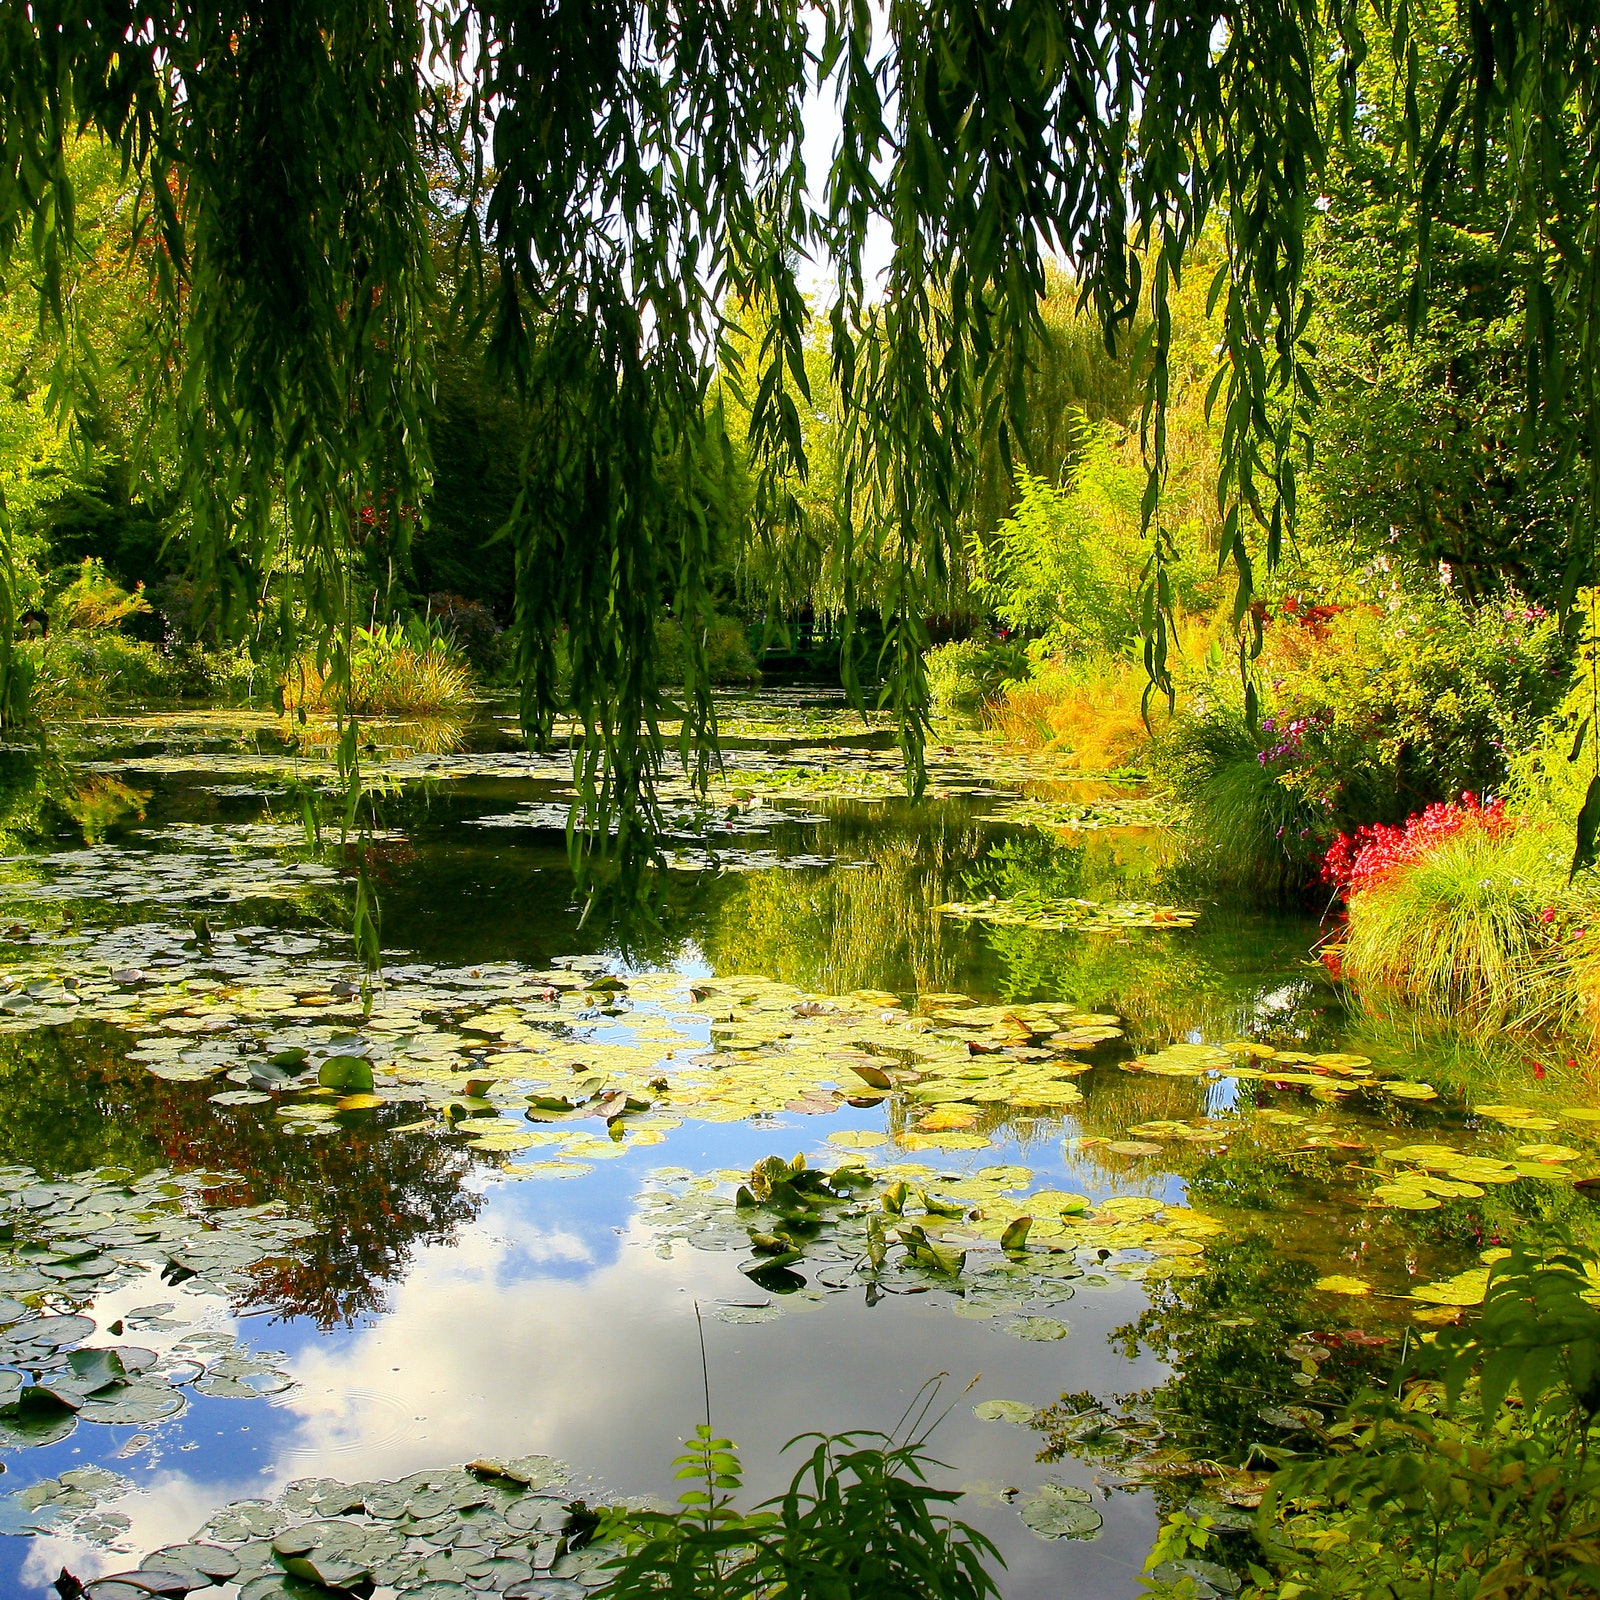 Monet's Garden in Giverny: Half-Day Guided Tour from Paris in France